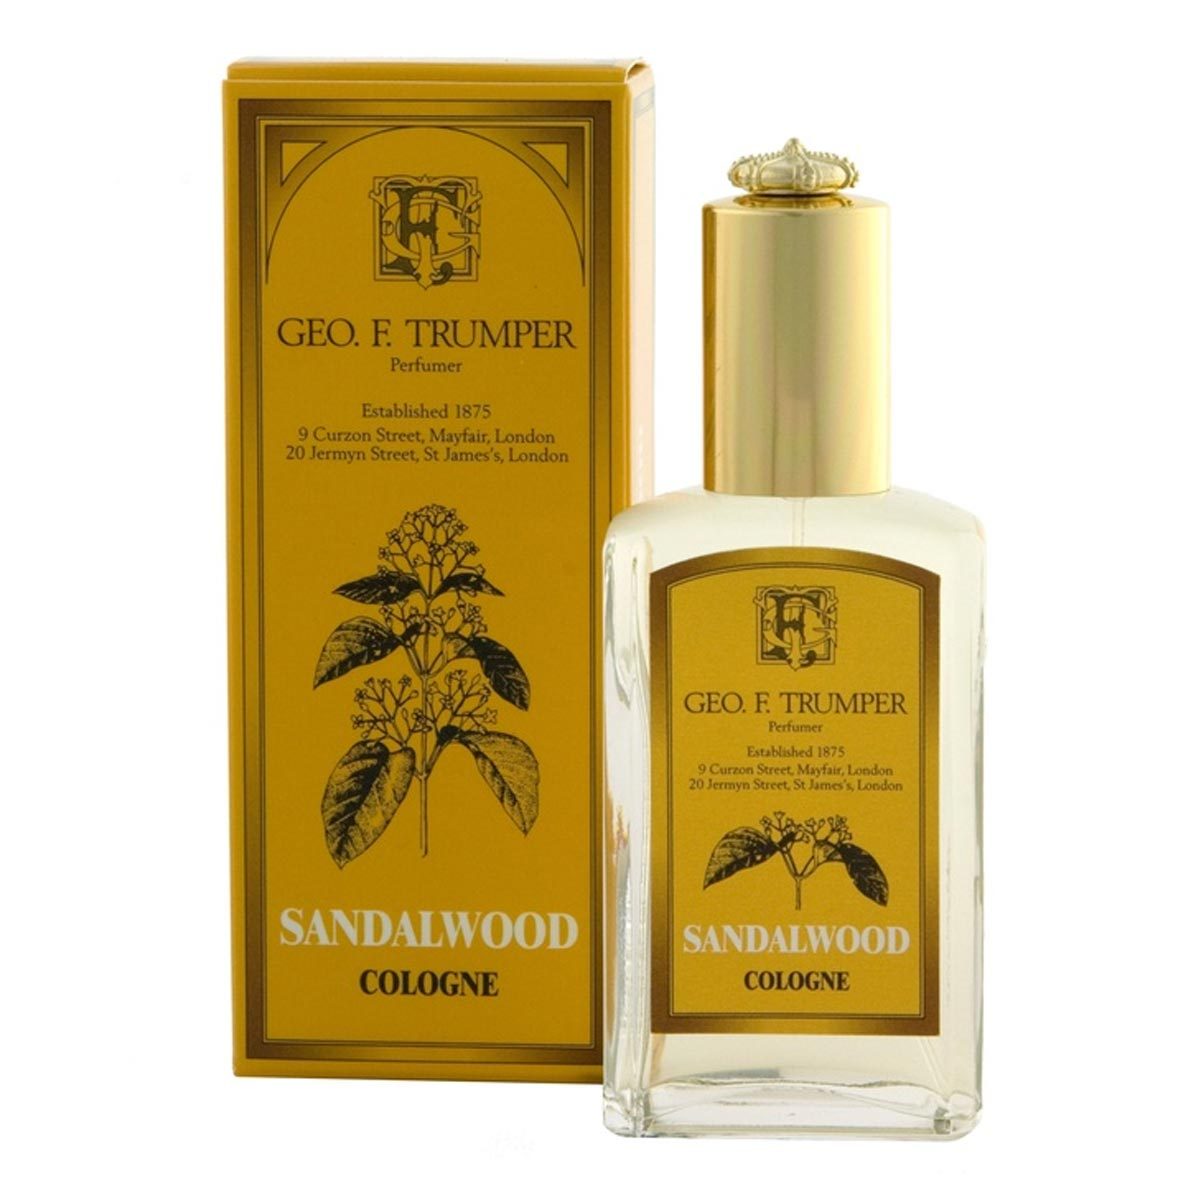 Primary image of Sandalwood Cologne